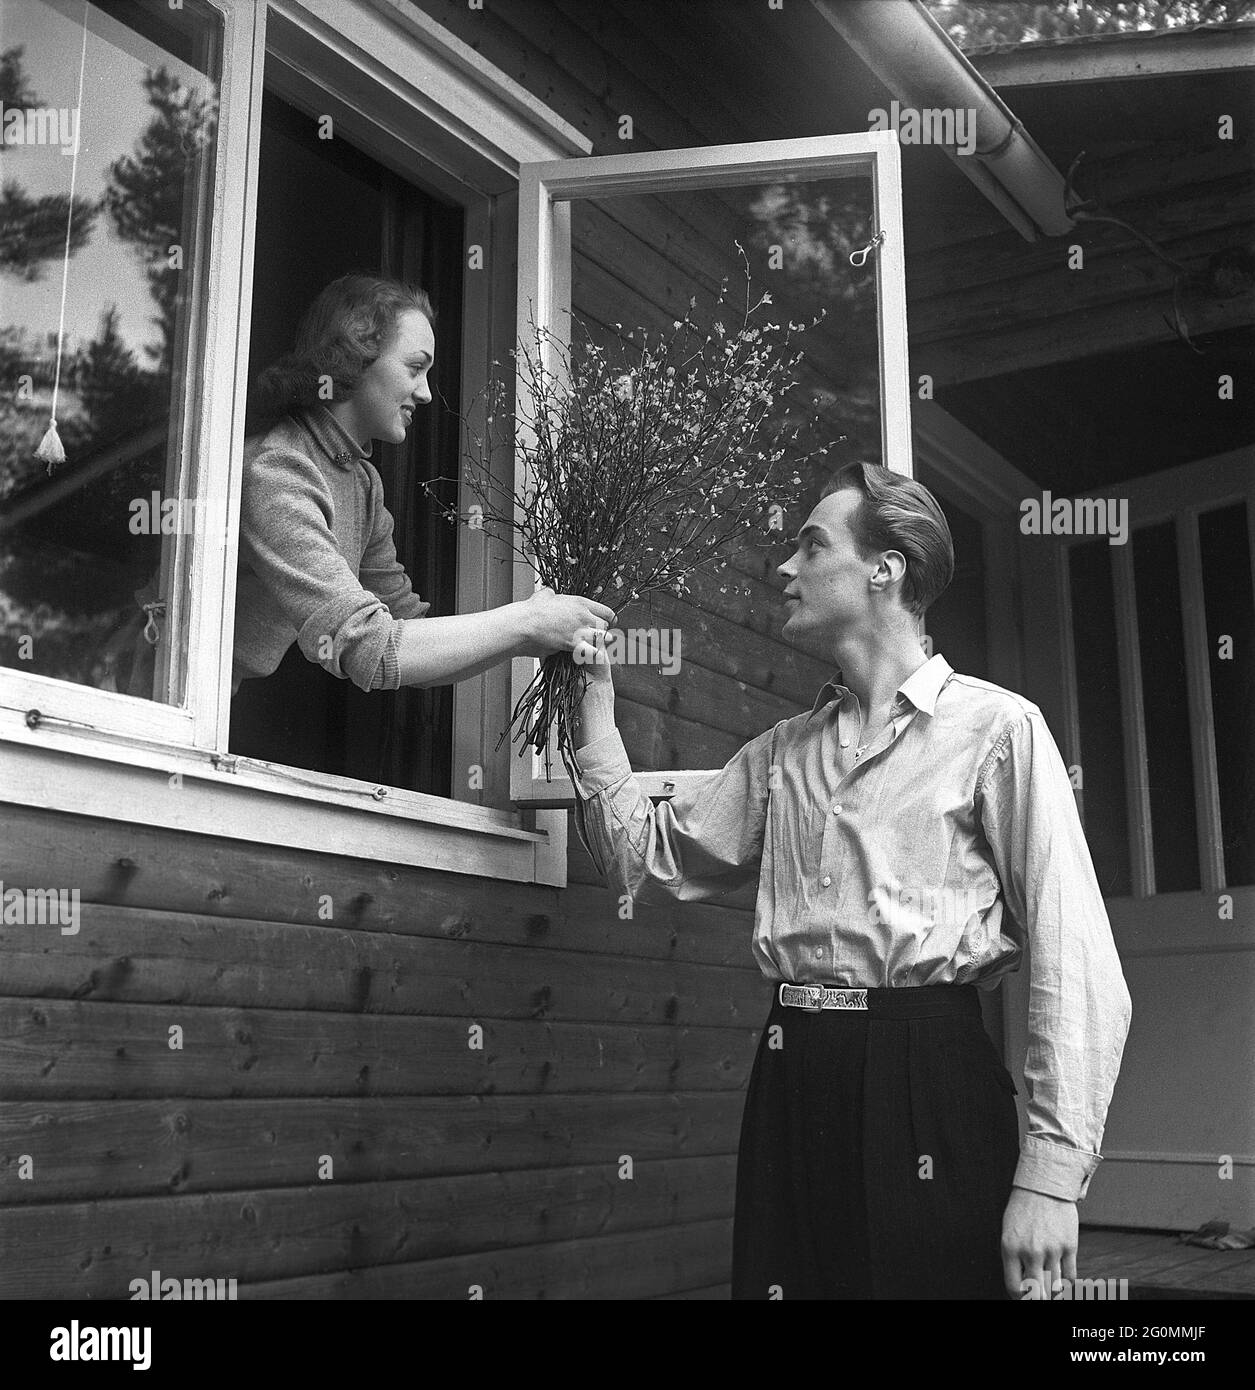 Lifestyle in the 1950s. A young couple pictured at their house. He is handing her a bouquet of branches with small leafs on it through the open window.   Sweden 1951 ref BB80-1 Stock Photo